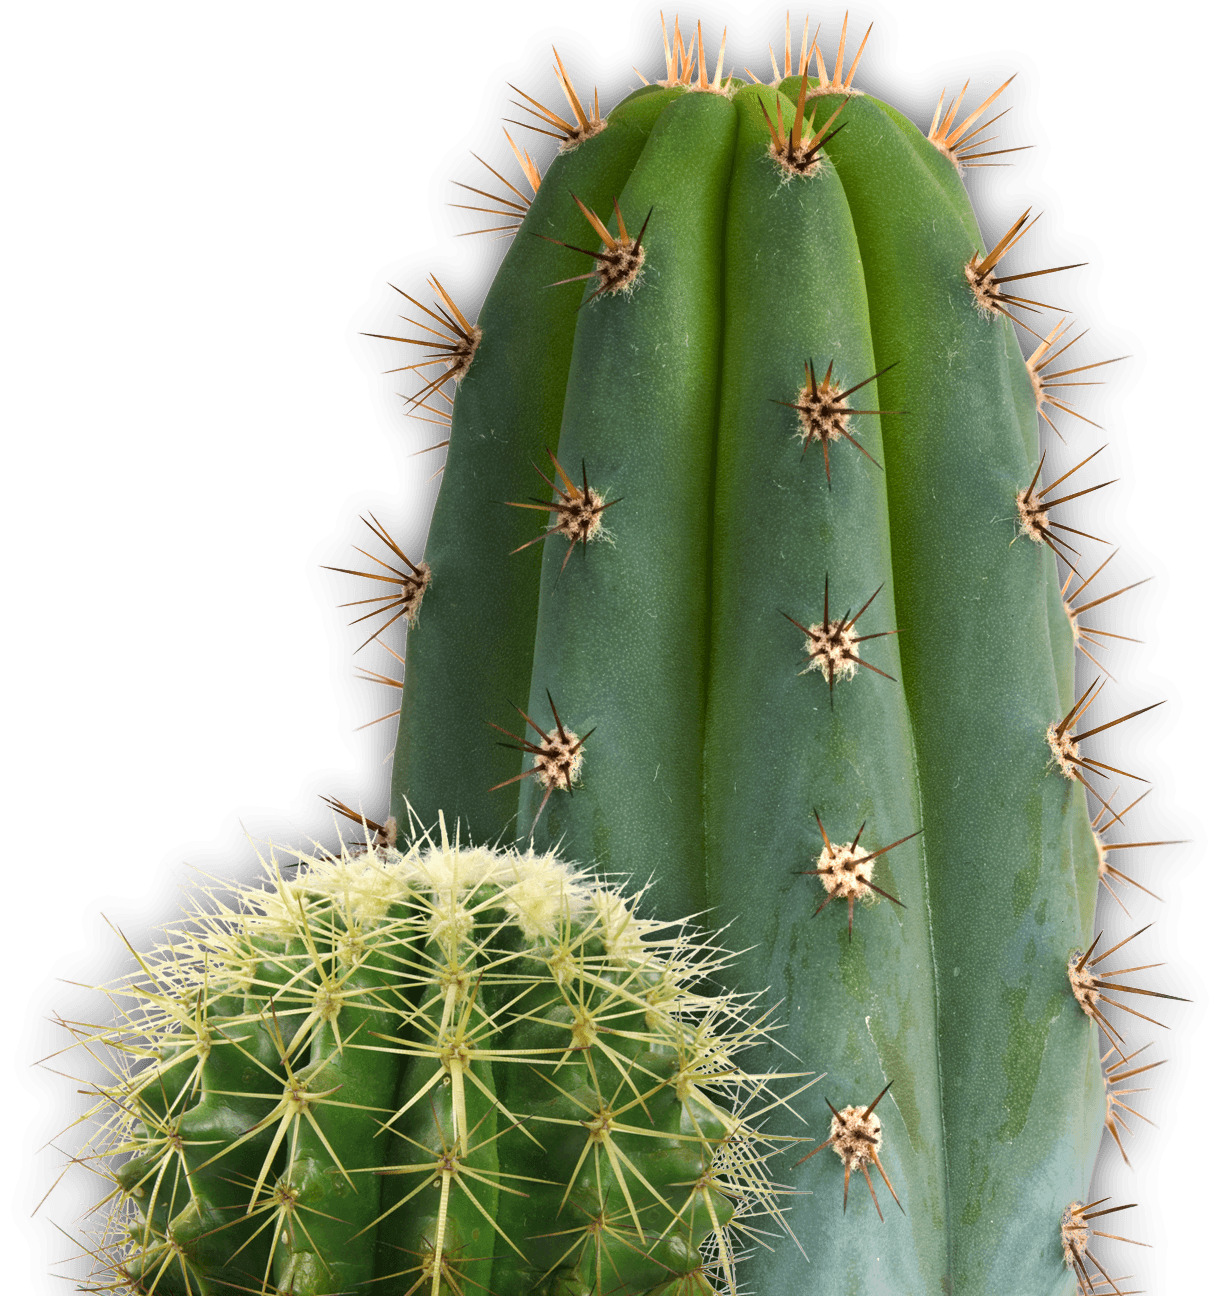 Small and Large Cactus icons